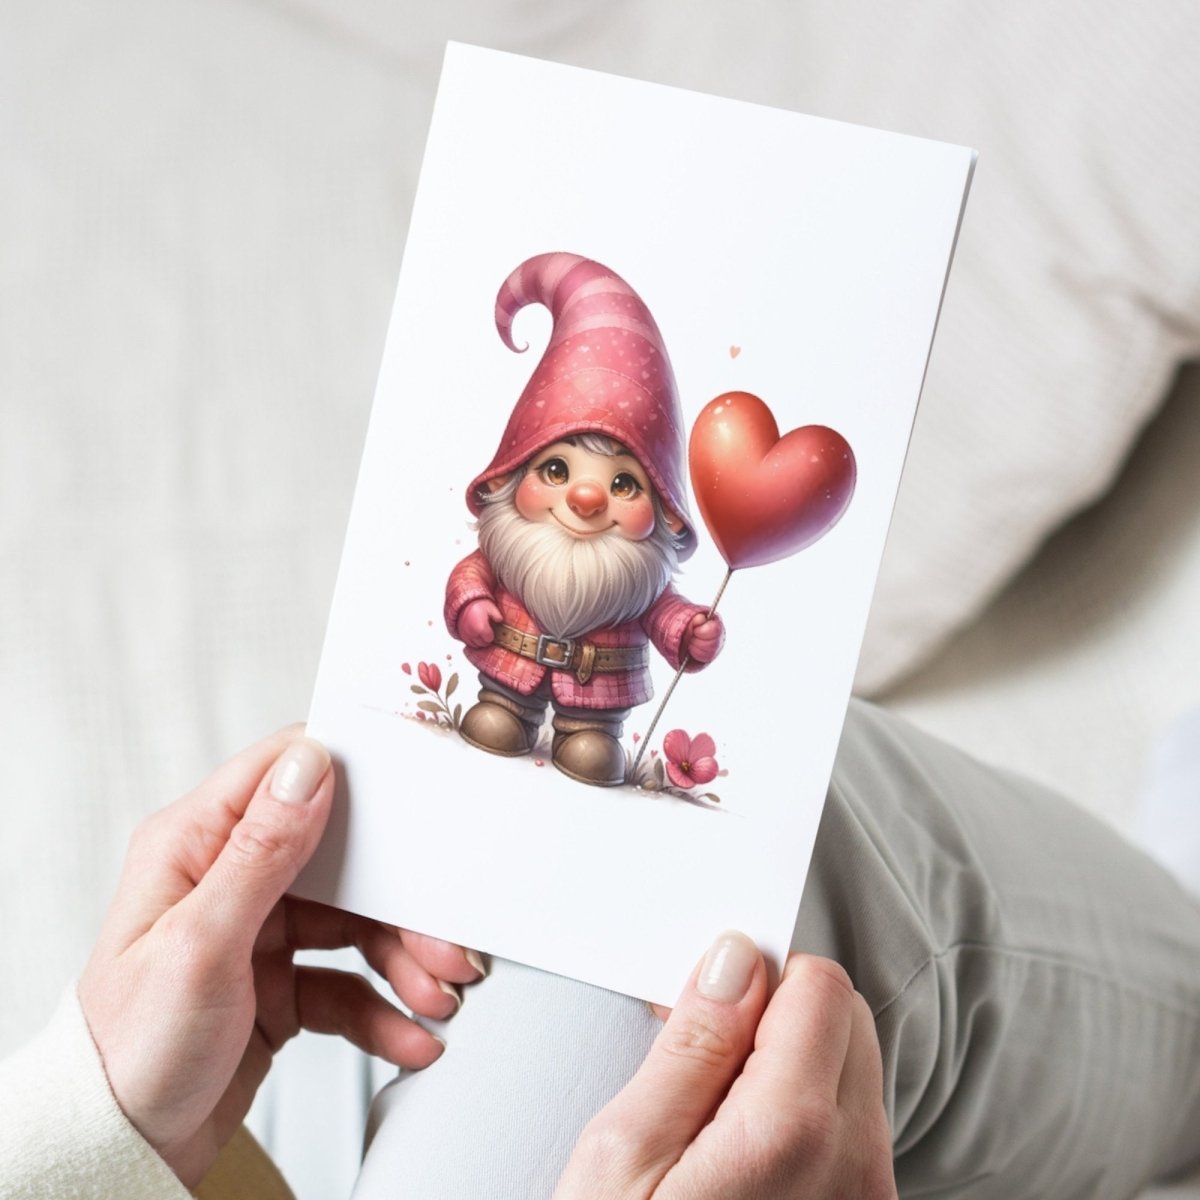 Cute Gnomes in Love Cliparts 20 PNG Bundle Children Valentines Day Set Card Crafting Junk Journal Kit for Classrooms Romantic Sweet Gnomes - Everything Pixel